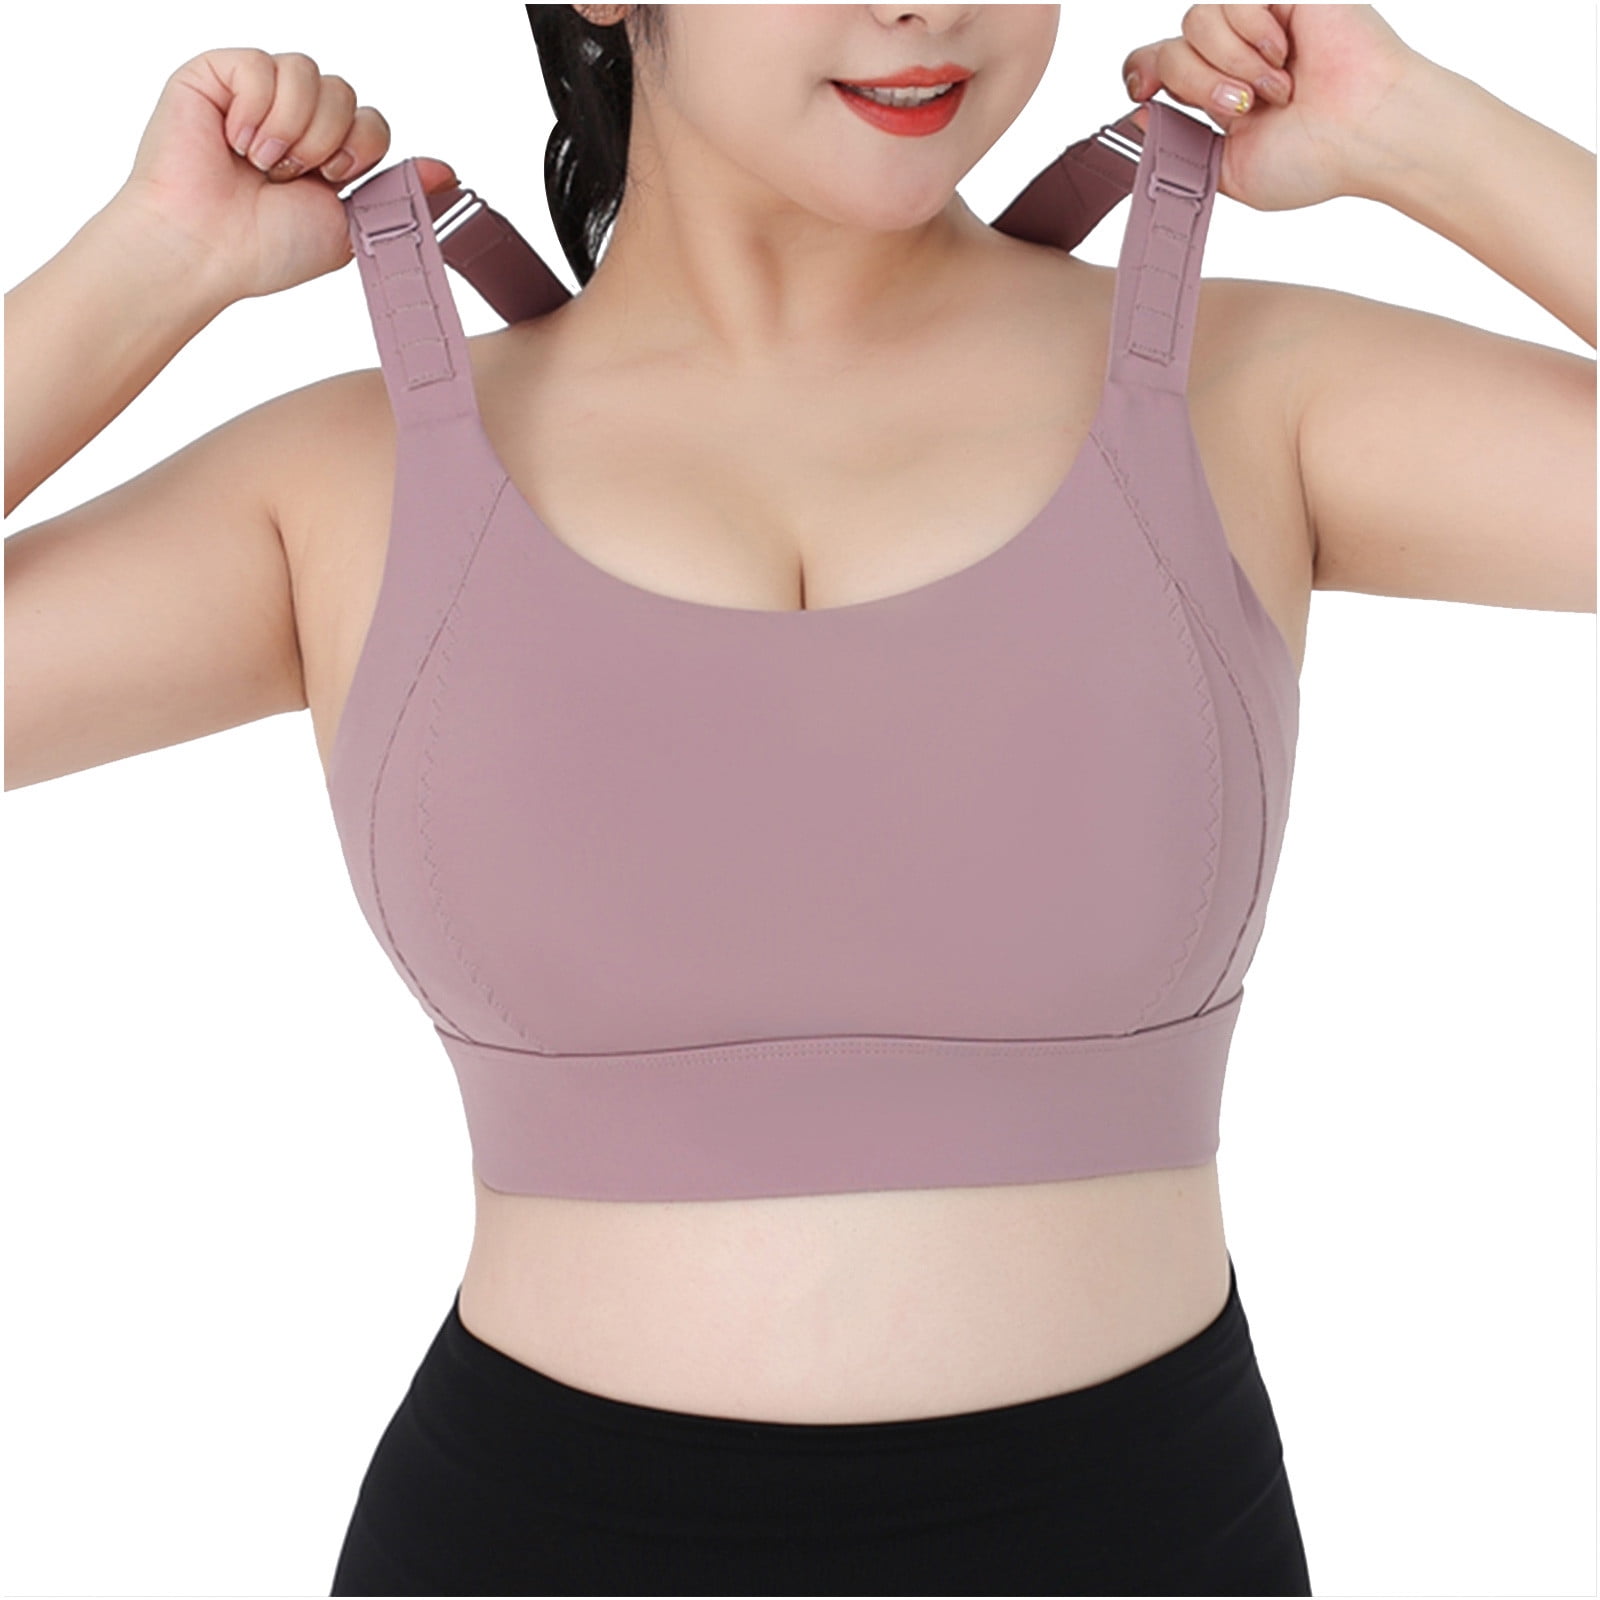 Longline Padded Sports Bra for Women Workout Tops Criss Cross Strappy  Athletic Yoga Crop Tank Top Gym Shirts Wirefree